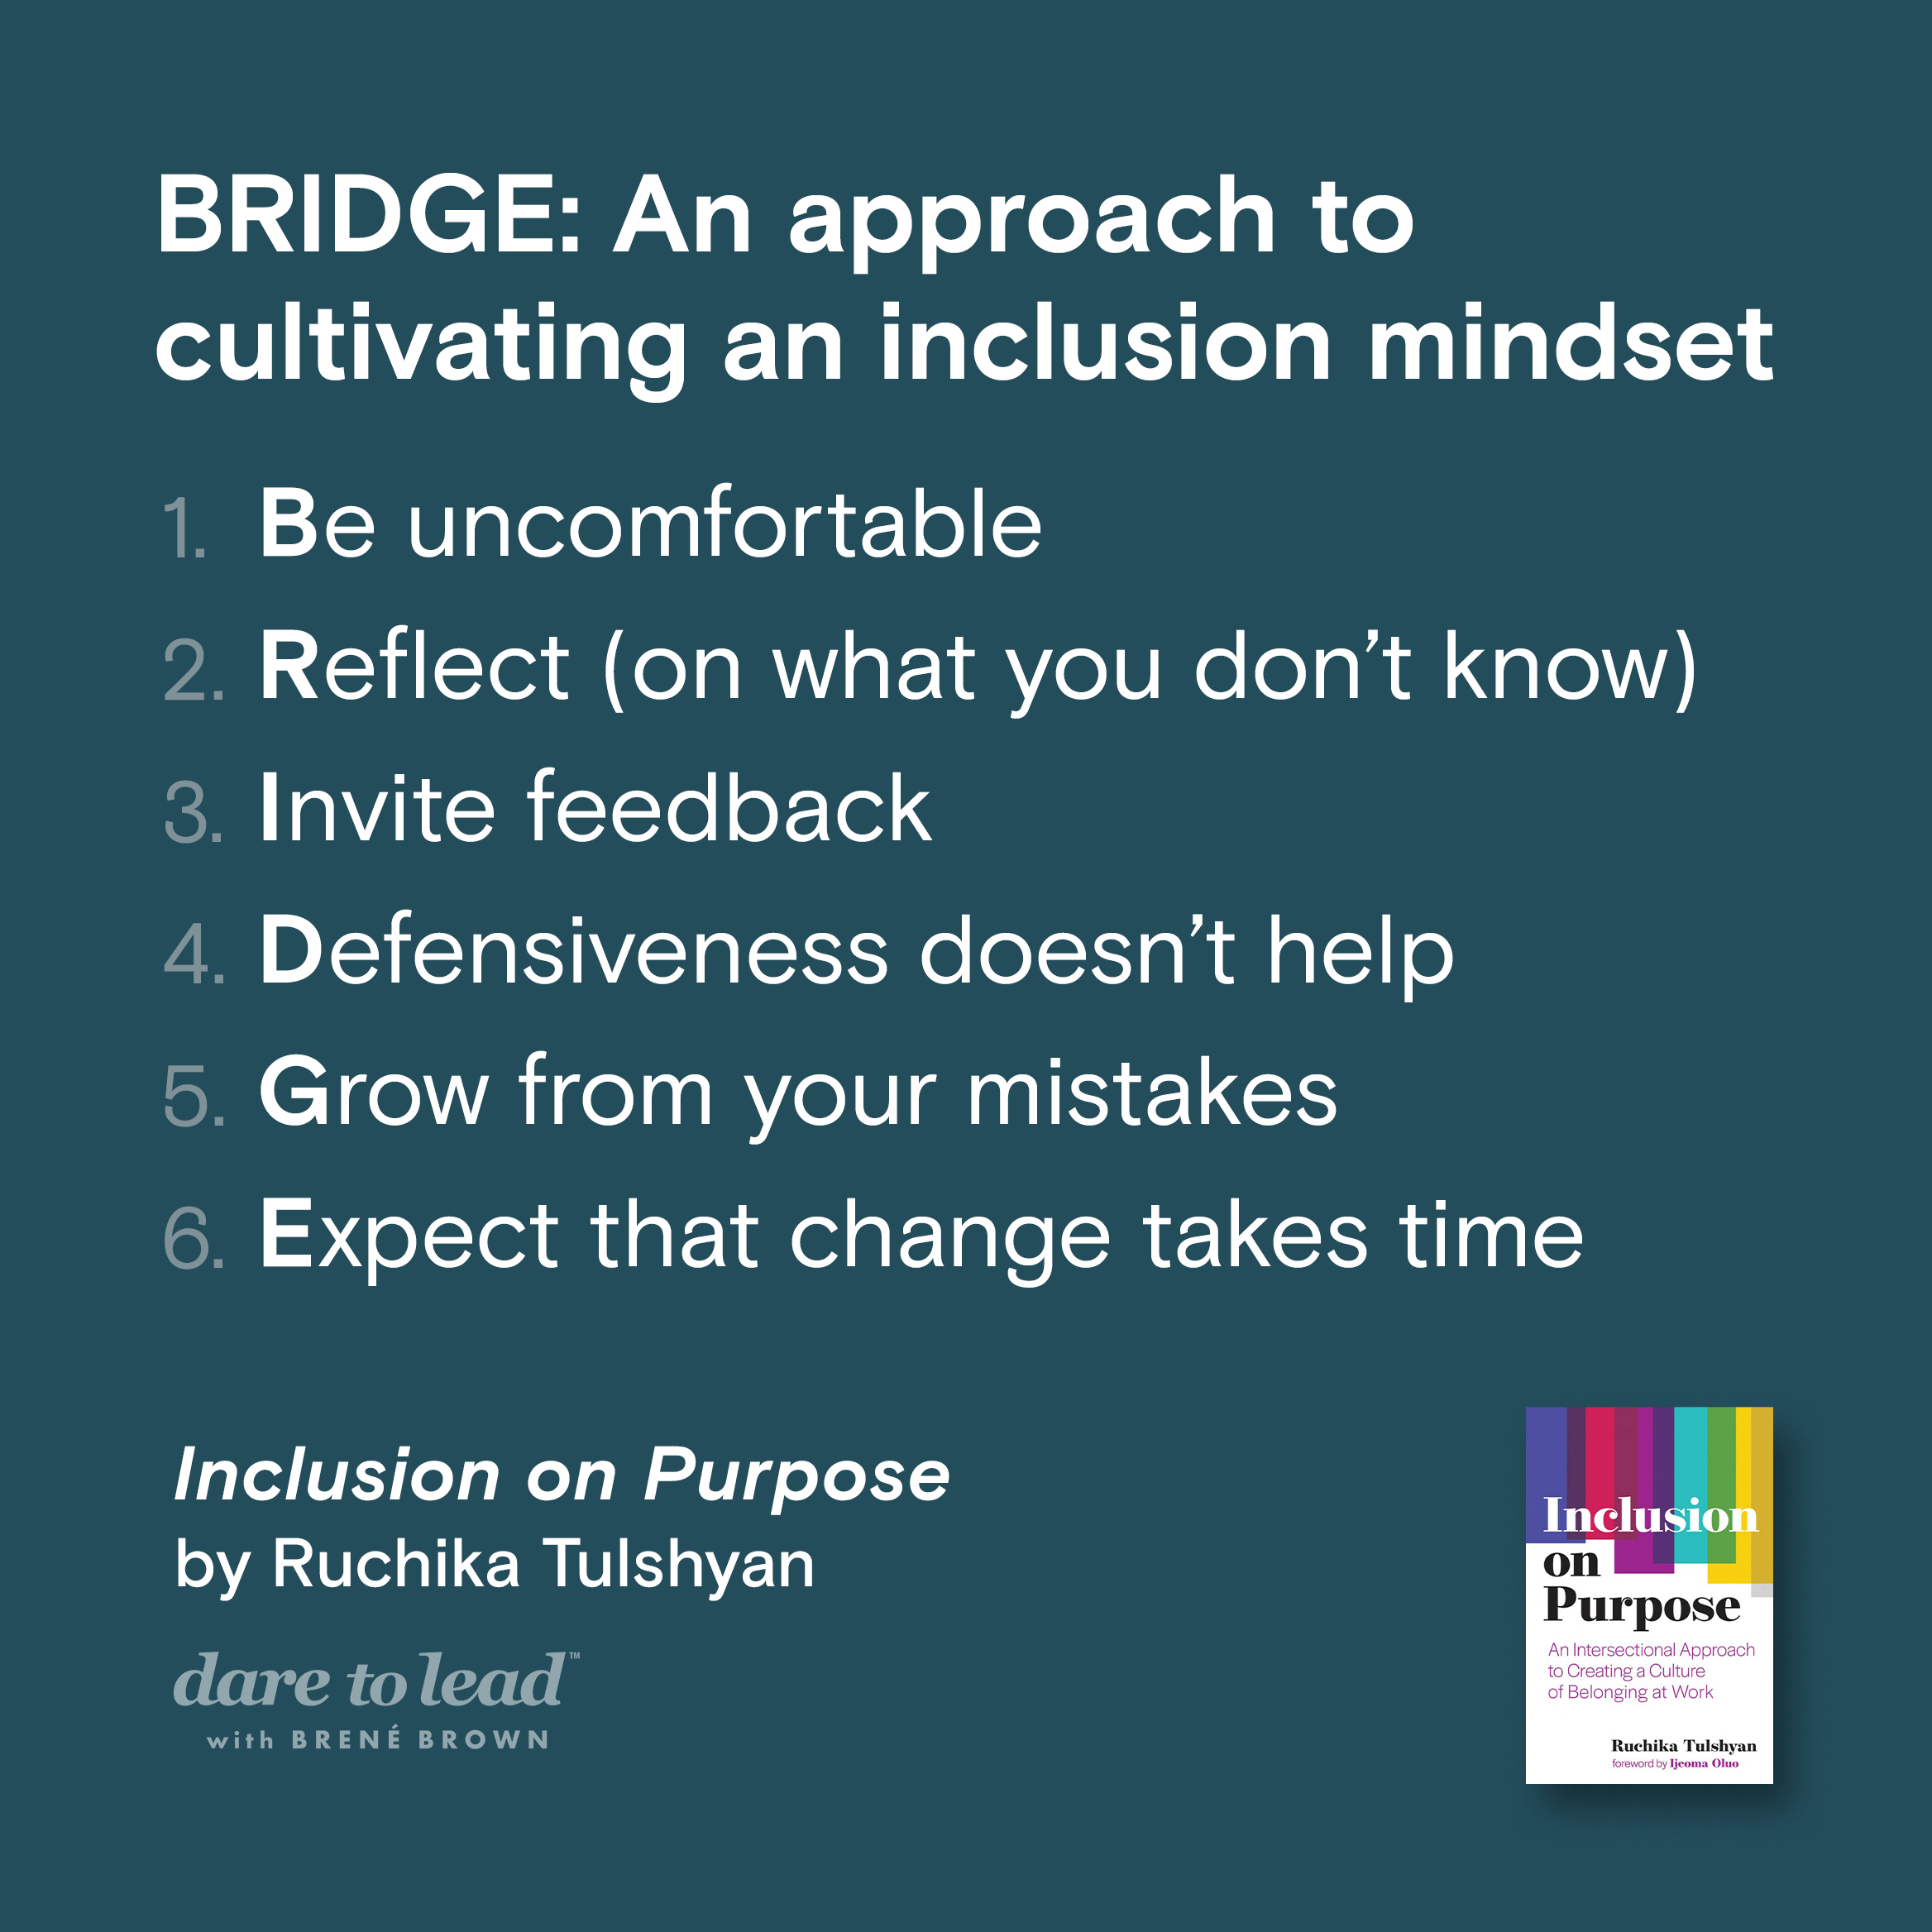 The BRIDGE framework from ‘Inclusion on Purpose’ by Ruchika Tulshyan: 1. Be uncomfortable. 2. Reflect (on what you don’t know). 3. Invite feedback. 4. Defensiveness doesn’t help. 5. Grow from your mistakes. 6. Expect that change takes time.